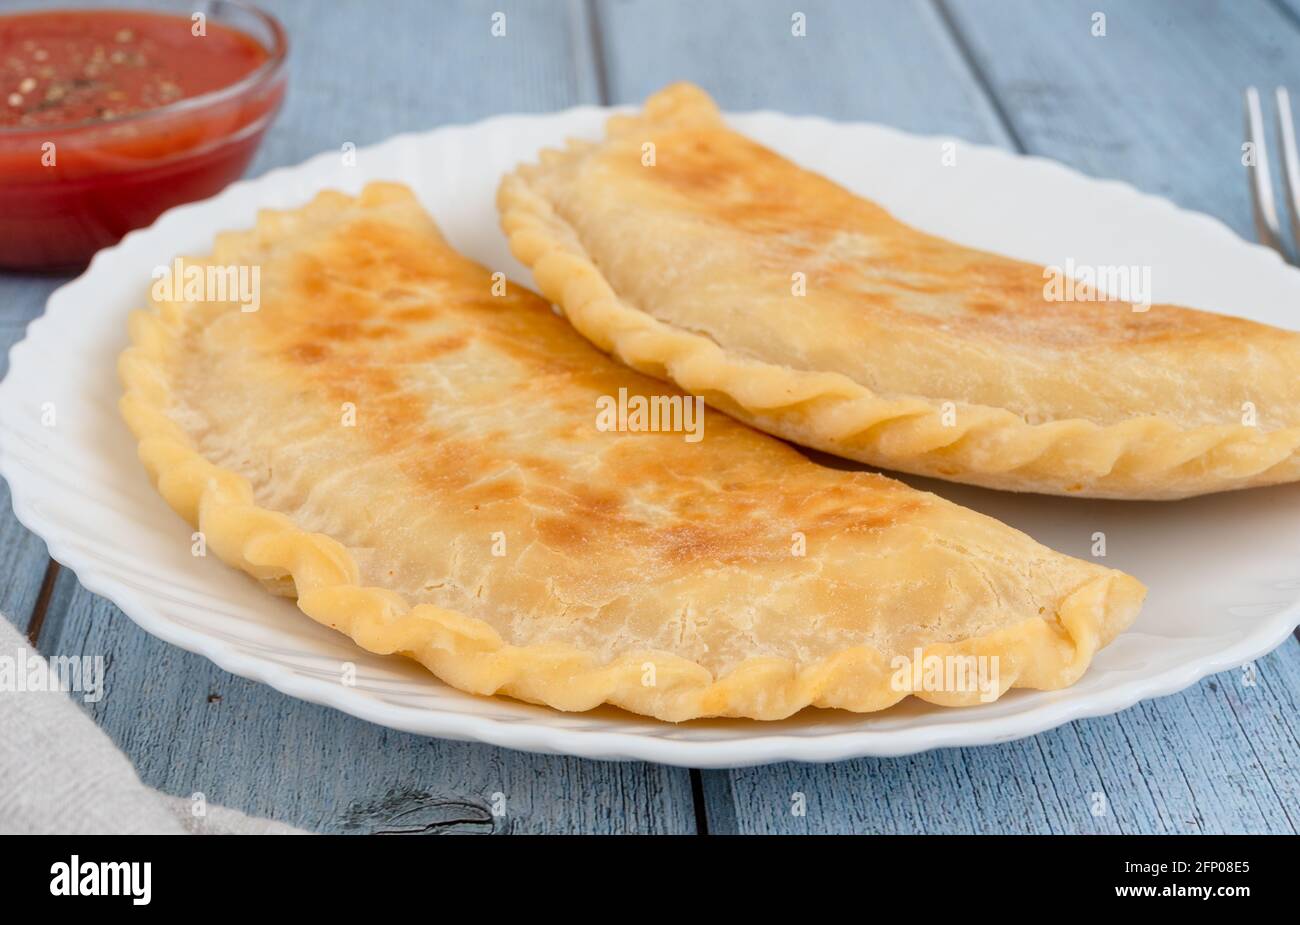 Fried pies with meat on a plate, side view Stock Photo